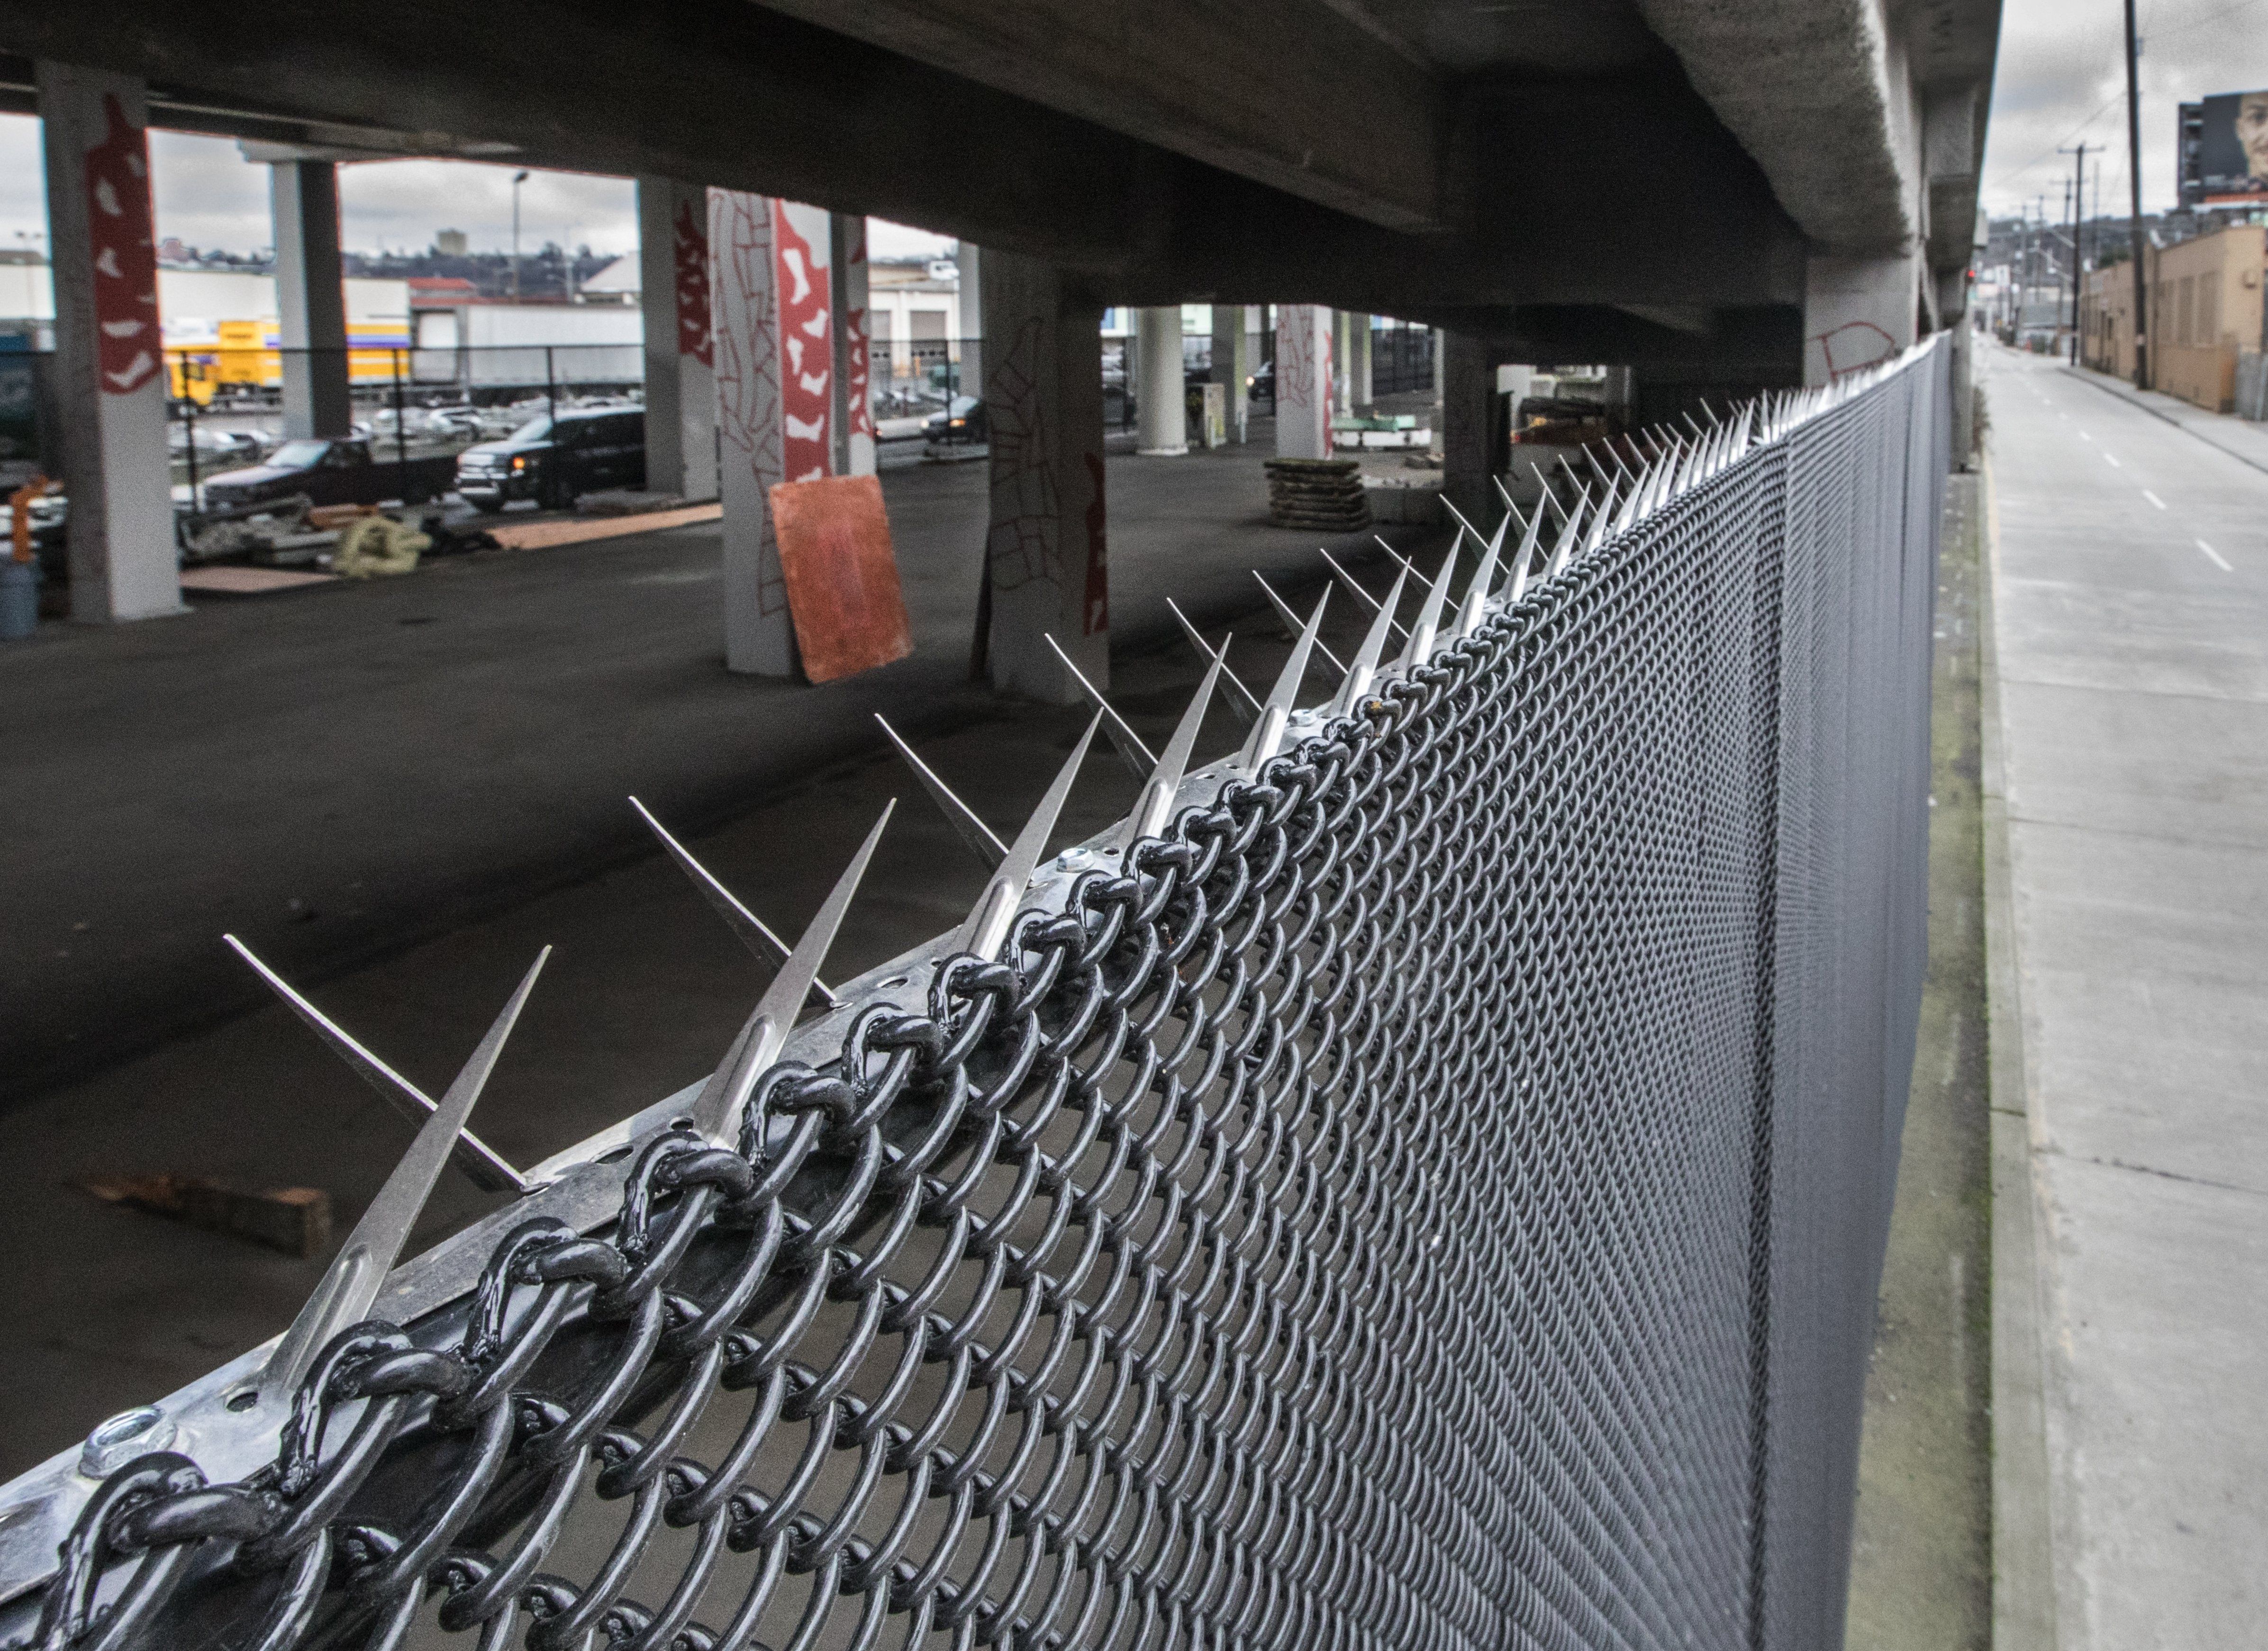 Seattle is putting fences under its bridges to keep campers out — and some say thats wrong The Seattle Times